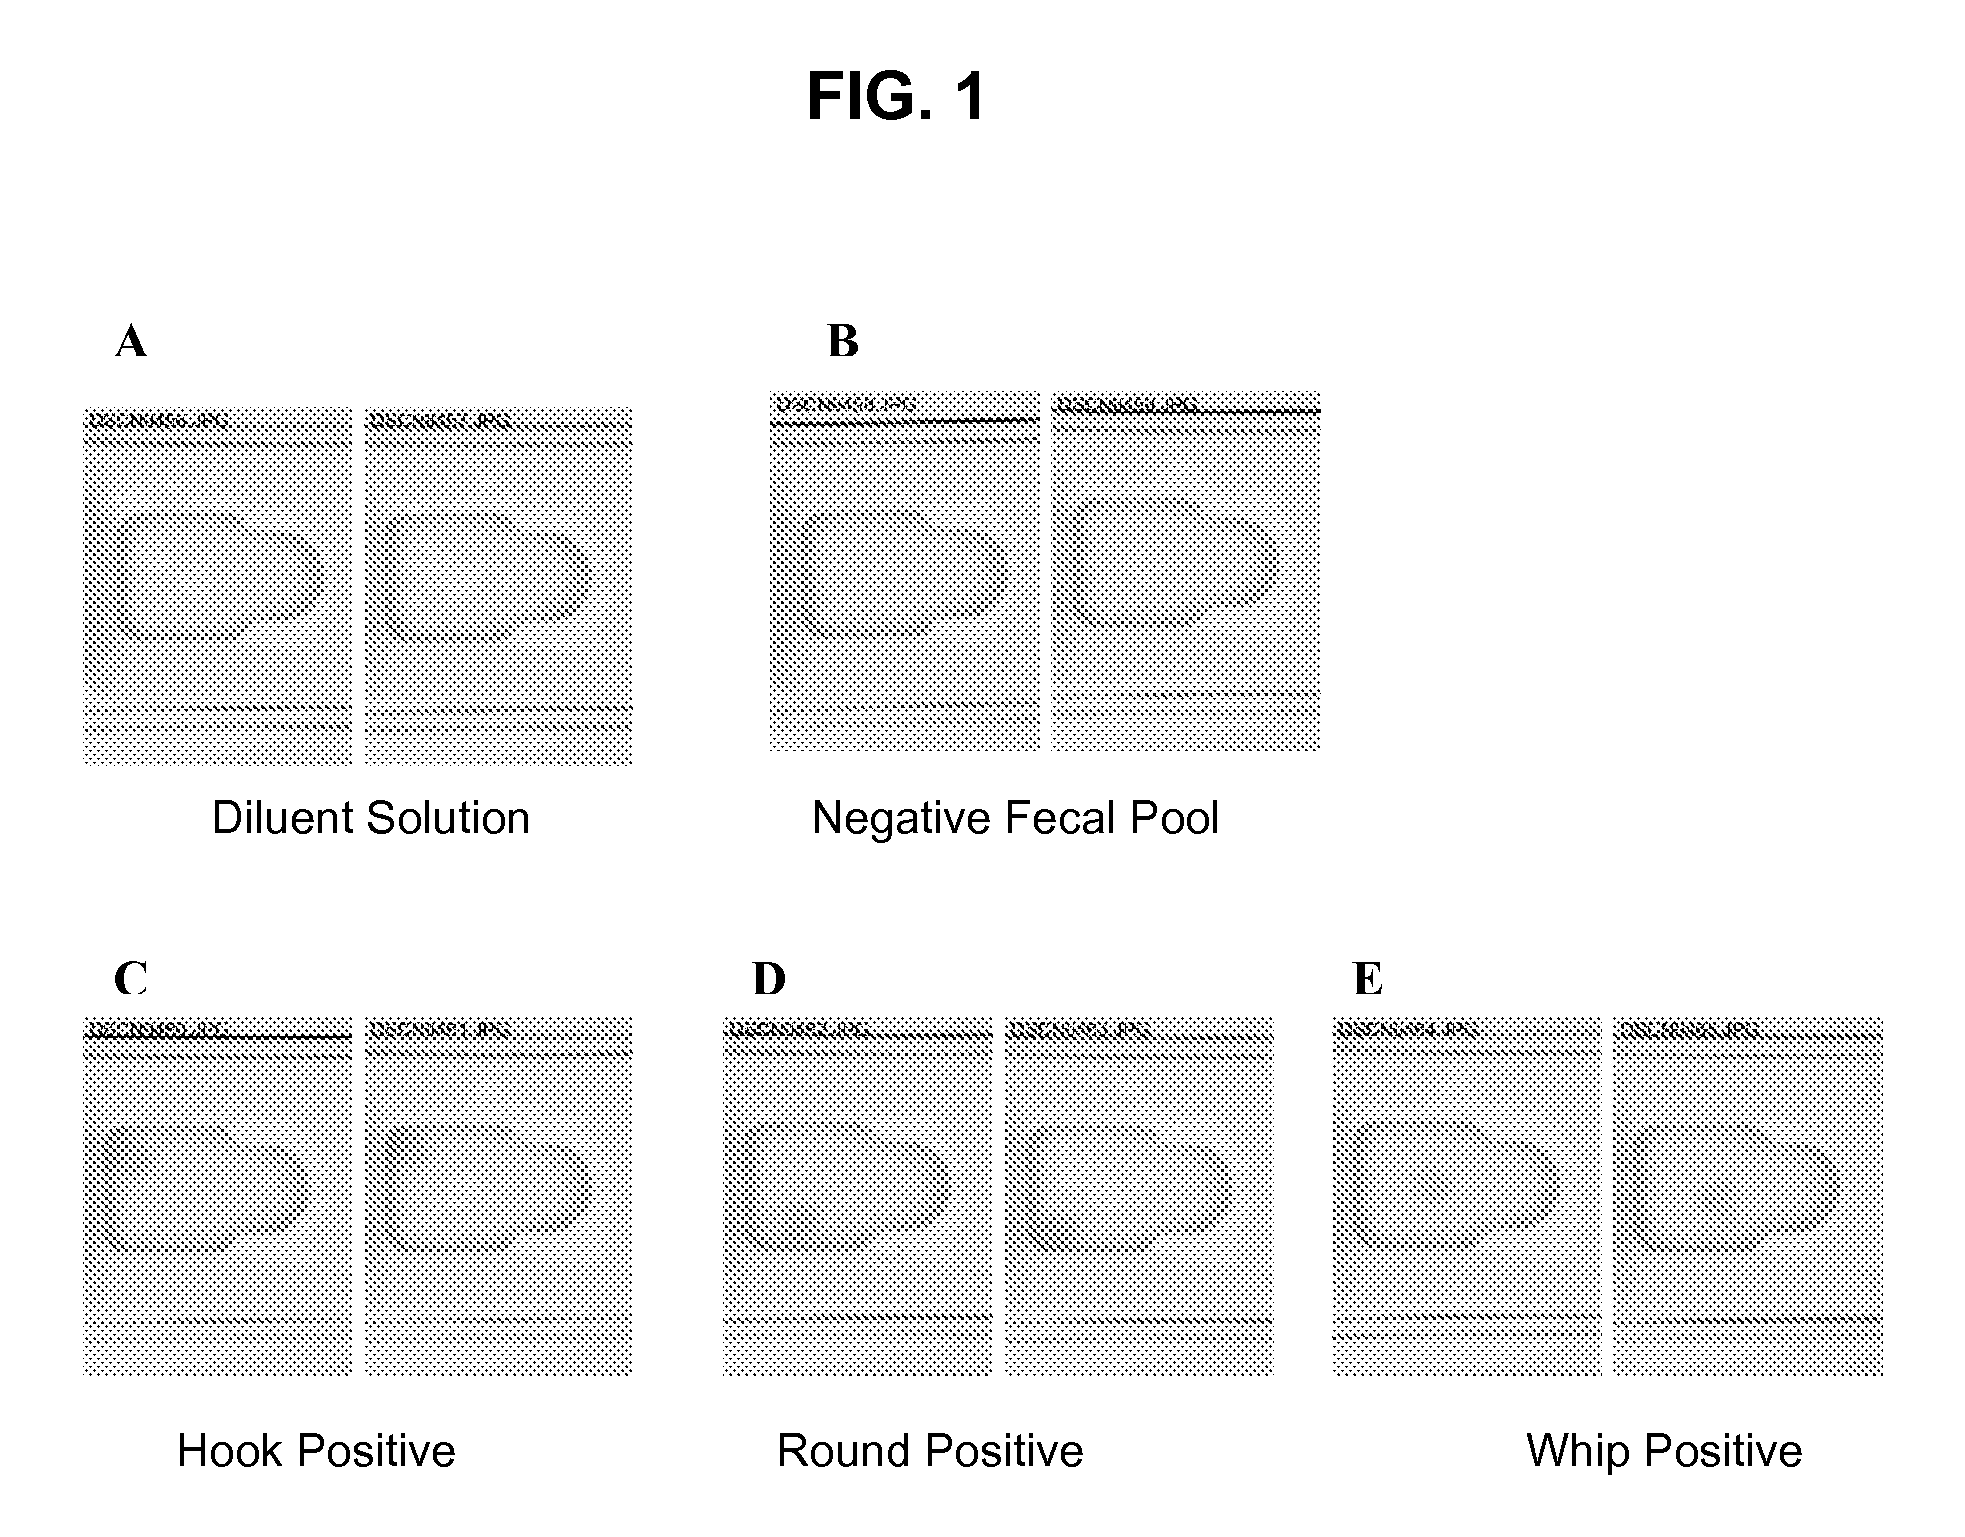 Methods, Devices, Kits and Compositions for Detecting Roundworm, Whipworm, and Hookworm